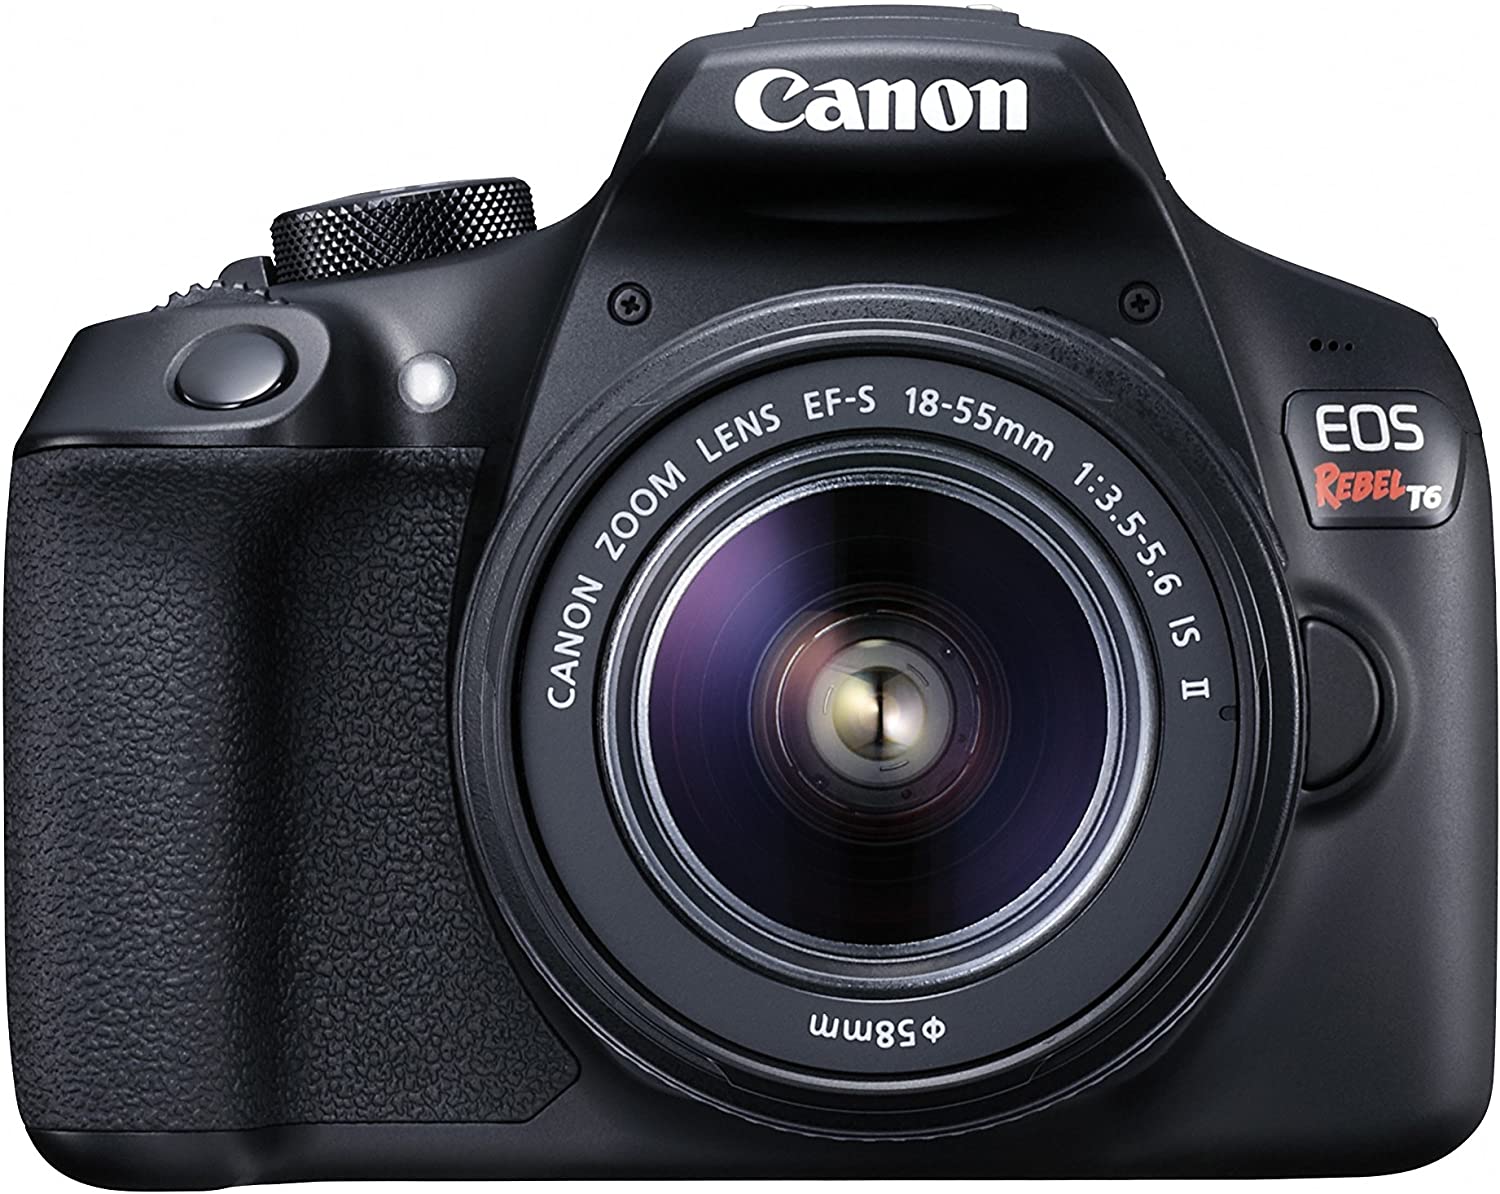 Canon EOS Rebel T6 Digital SLR Camera Kit with EF-S 18-55mm f/3.5-5.6